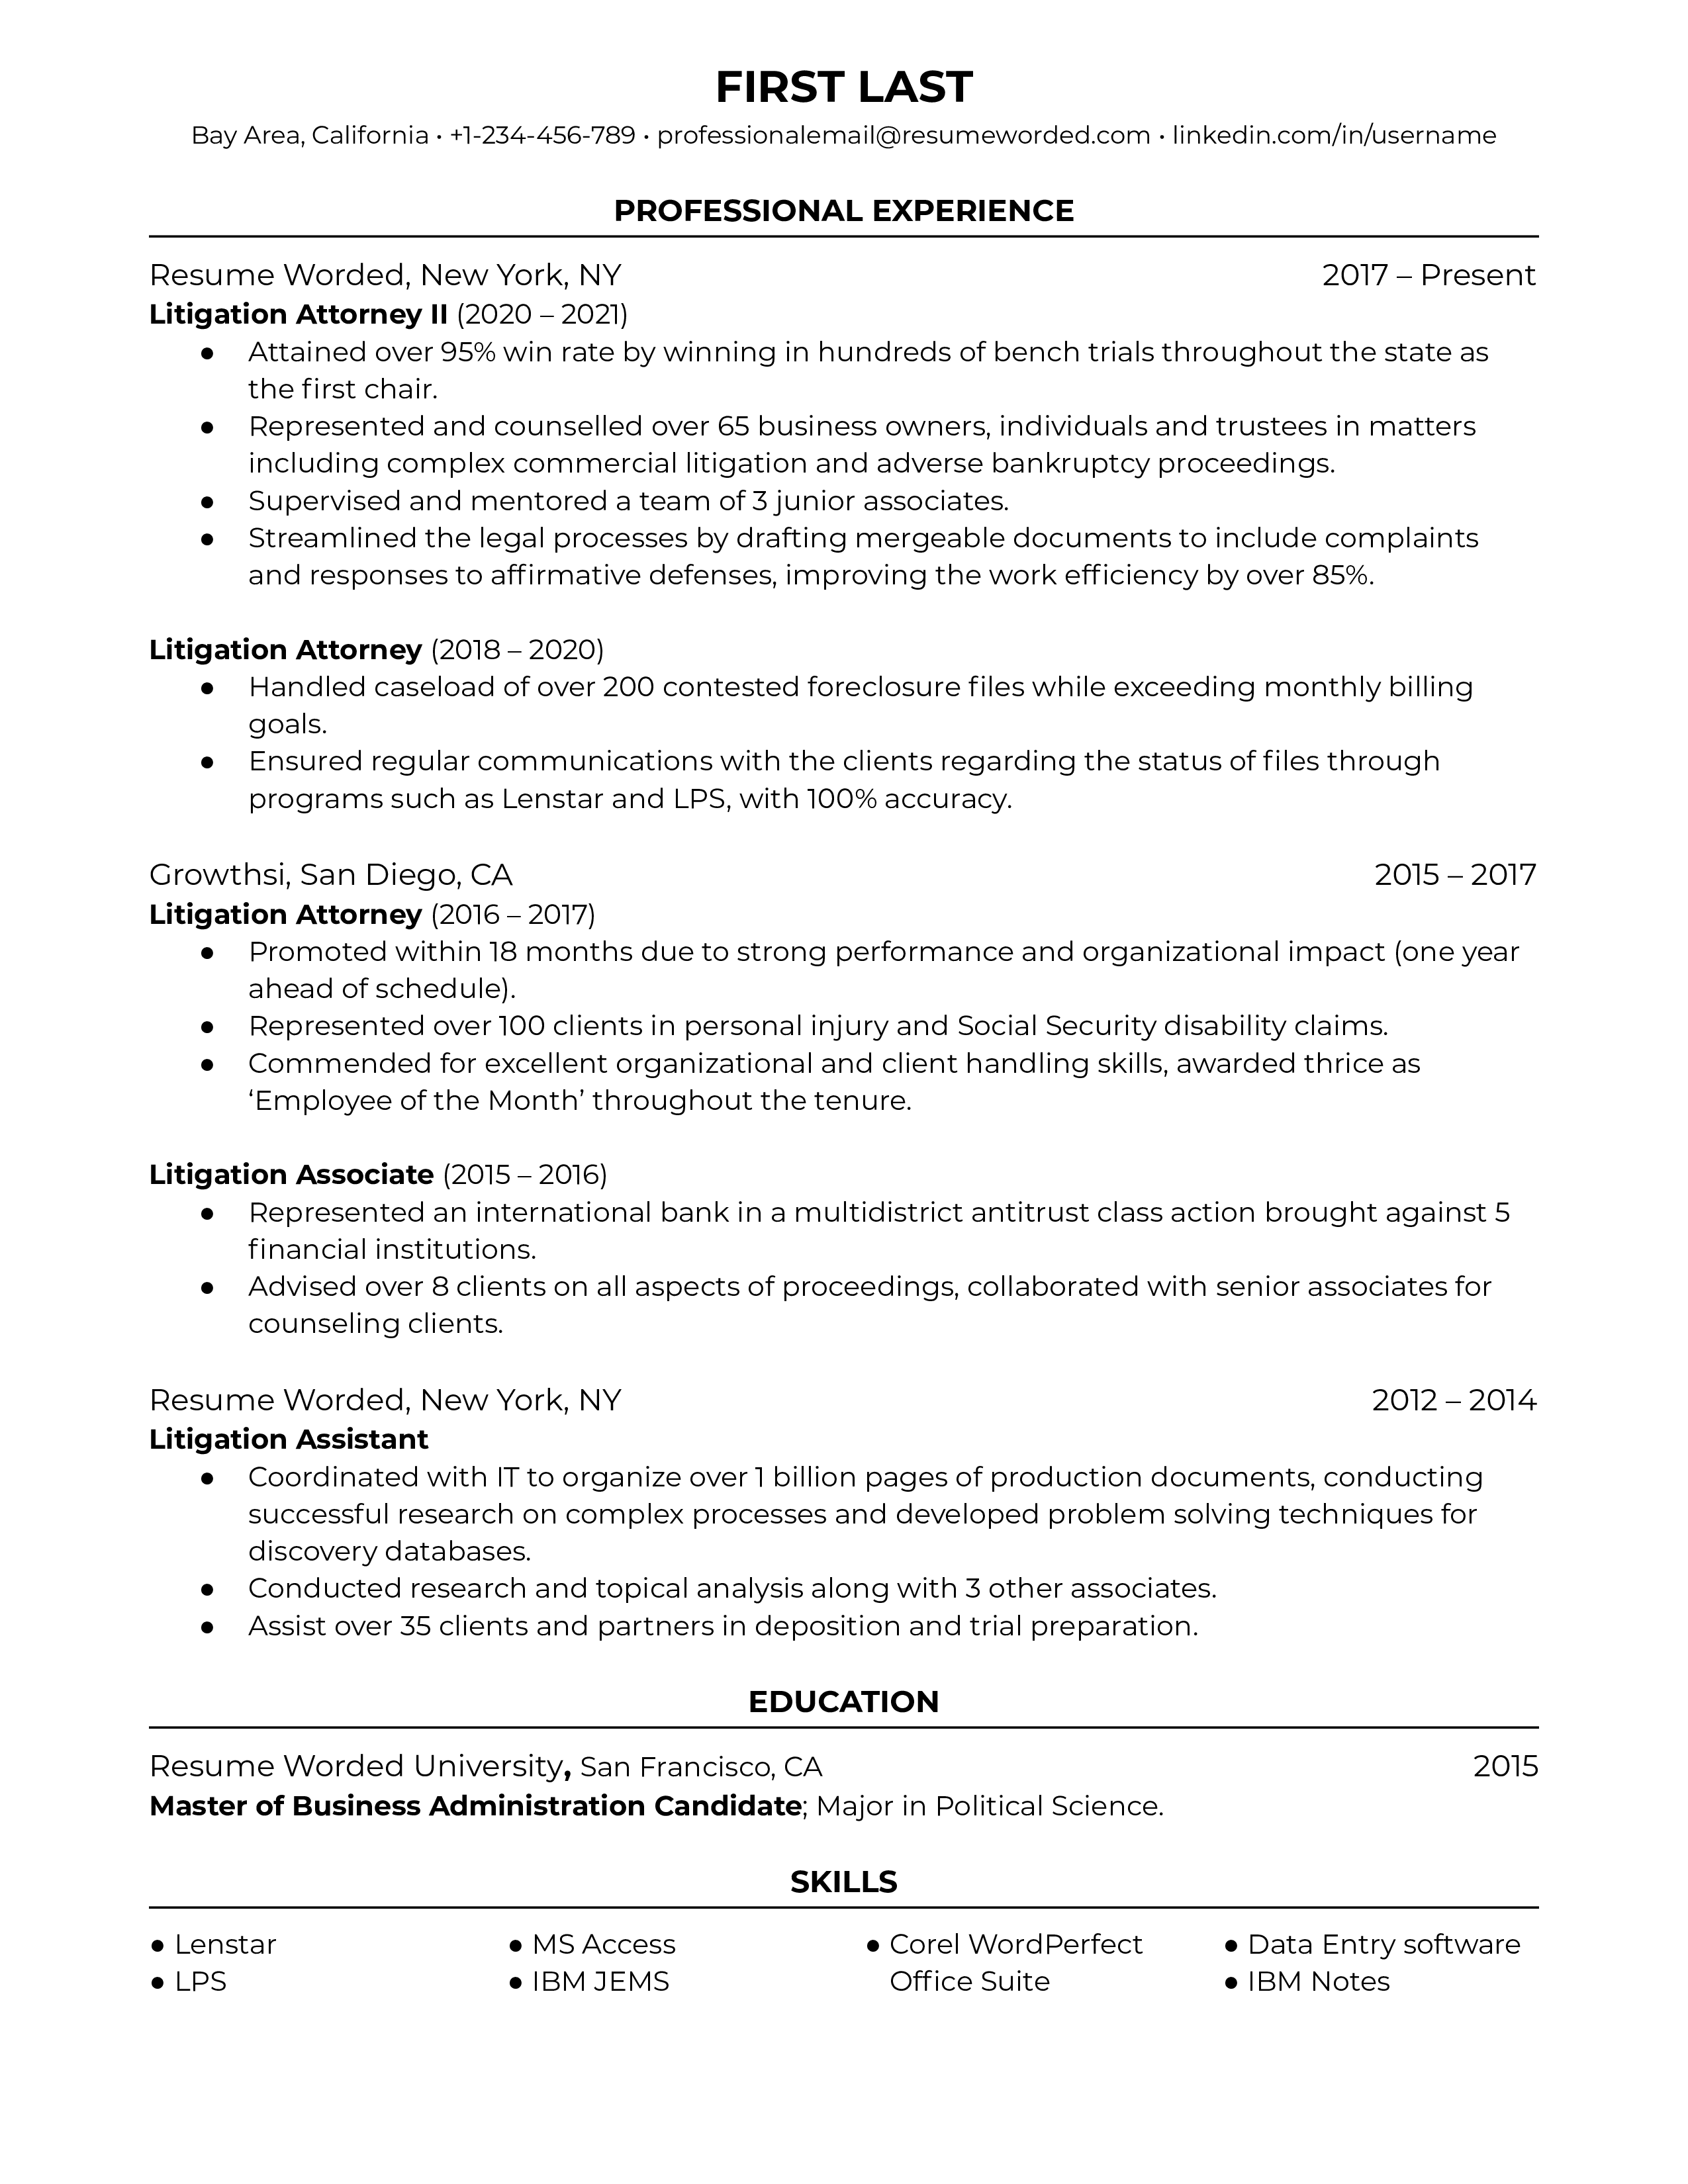 Litigation attorney resume template example with strong action verbs and a concise skills list